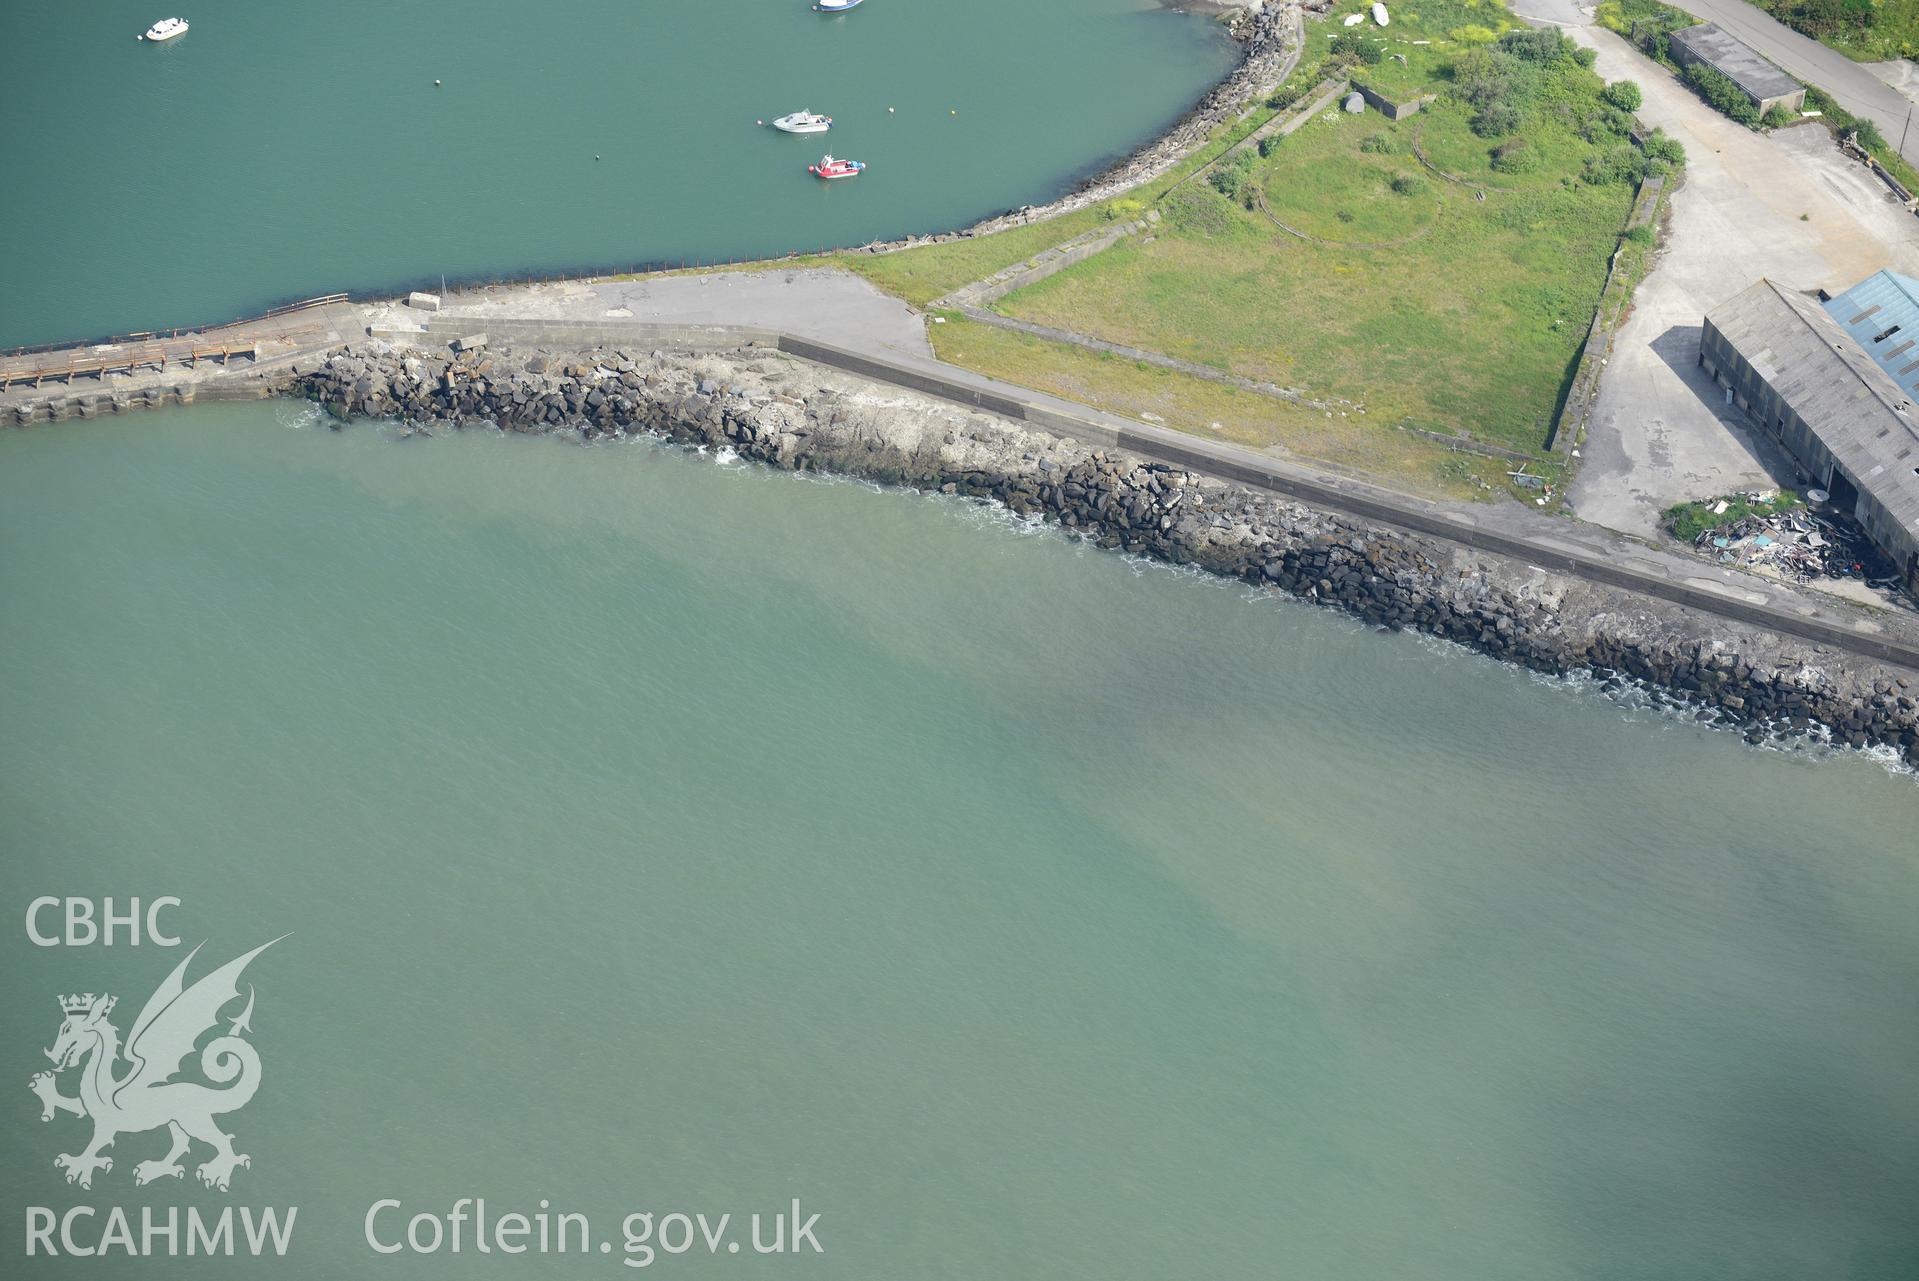 Boat repair and recycling workshop at Swansea Docks. Oblique aerial photograph taken during the Royal Commission's programme of archaeological aerial reconnaissance by Toby Driver on 19th June 2015.